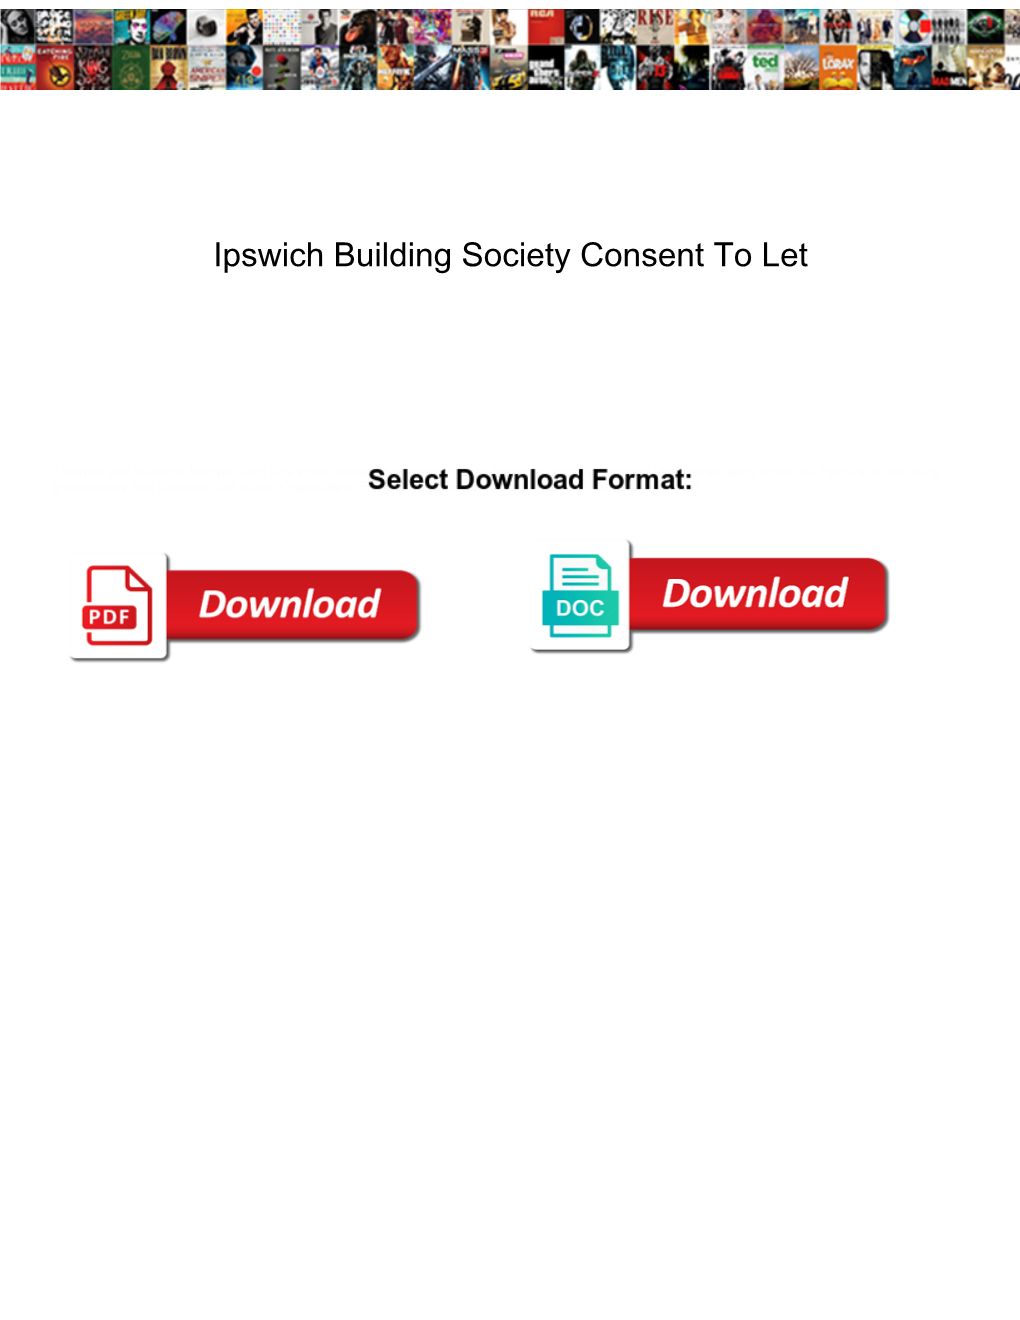 Ipswich Building Society Consent to Let